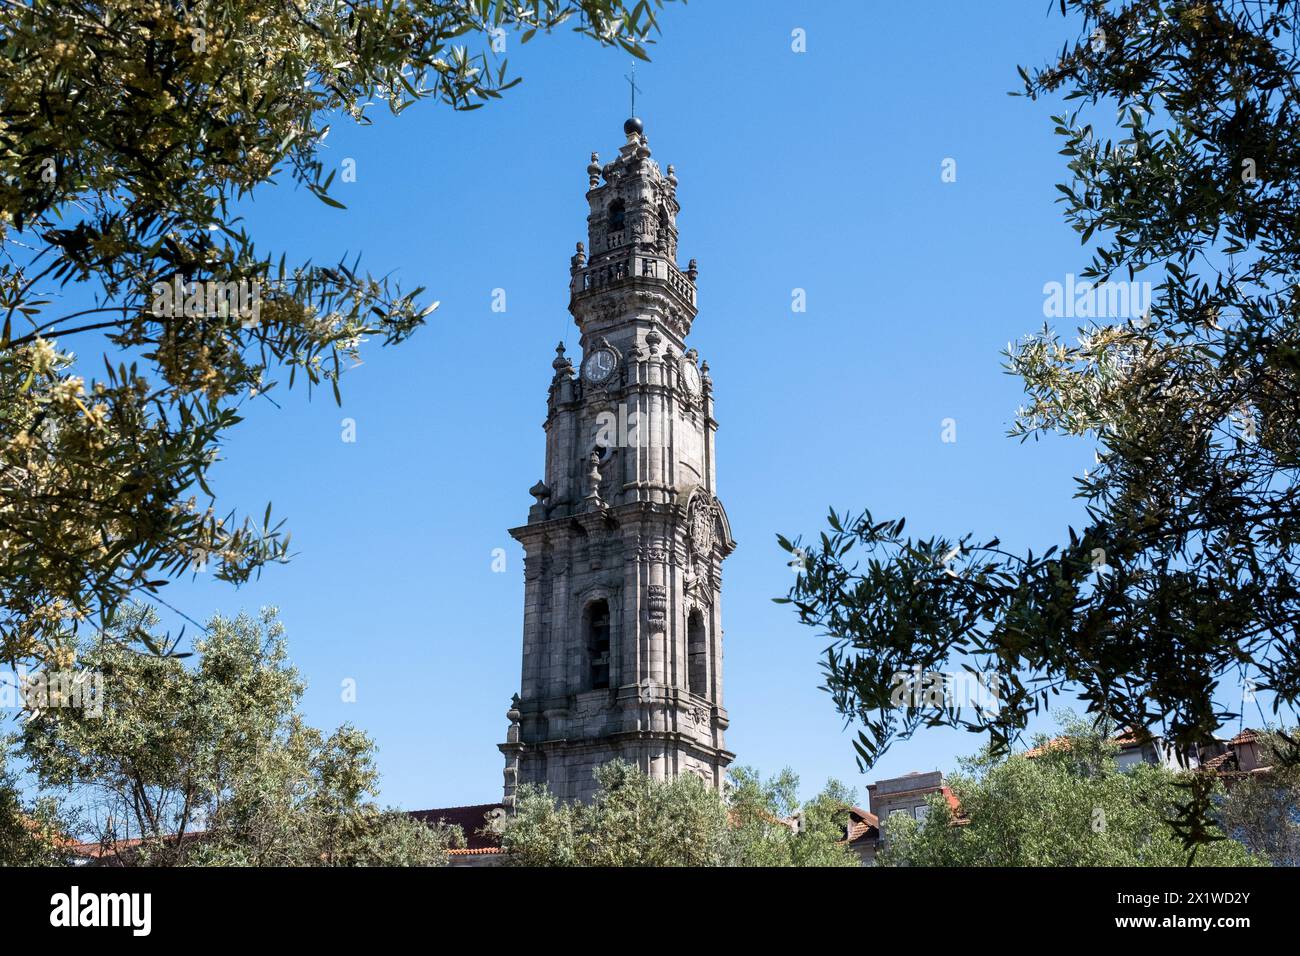 Torre dos Clerigos, the baroque bell tower of the Church of the Clerics in Porto, Portugal, on 8 May 2022. Torre dos Clerigos, tour clocher baroque de Stock Photo